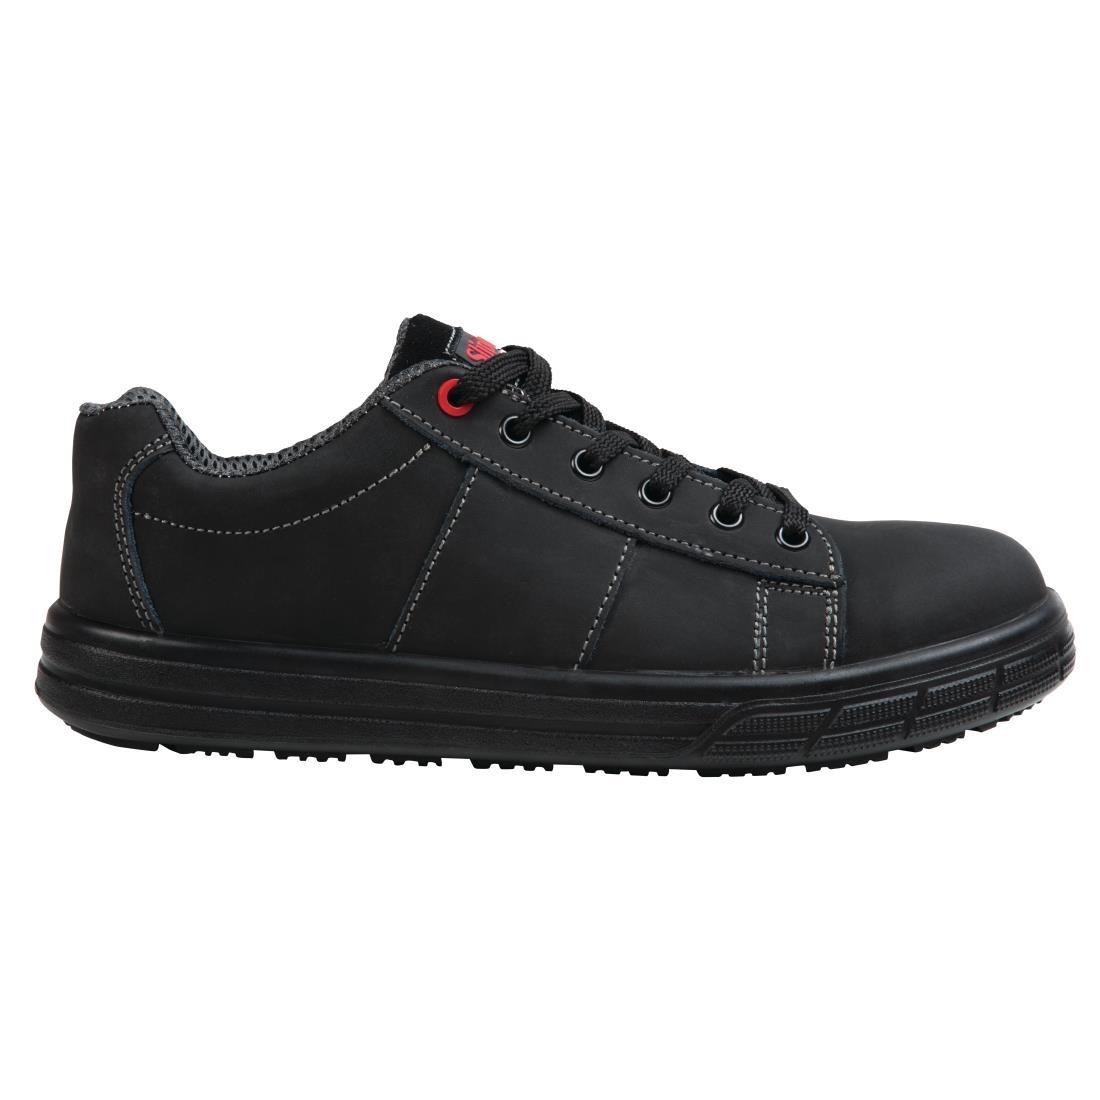 Slipbuster Safety Trainers Black 37 - BB420-37  - 5